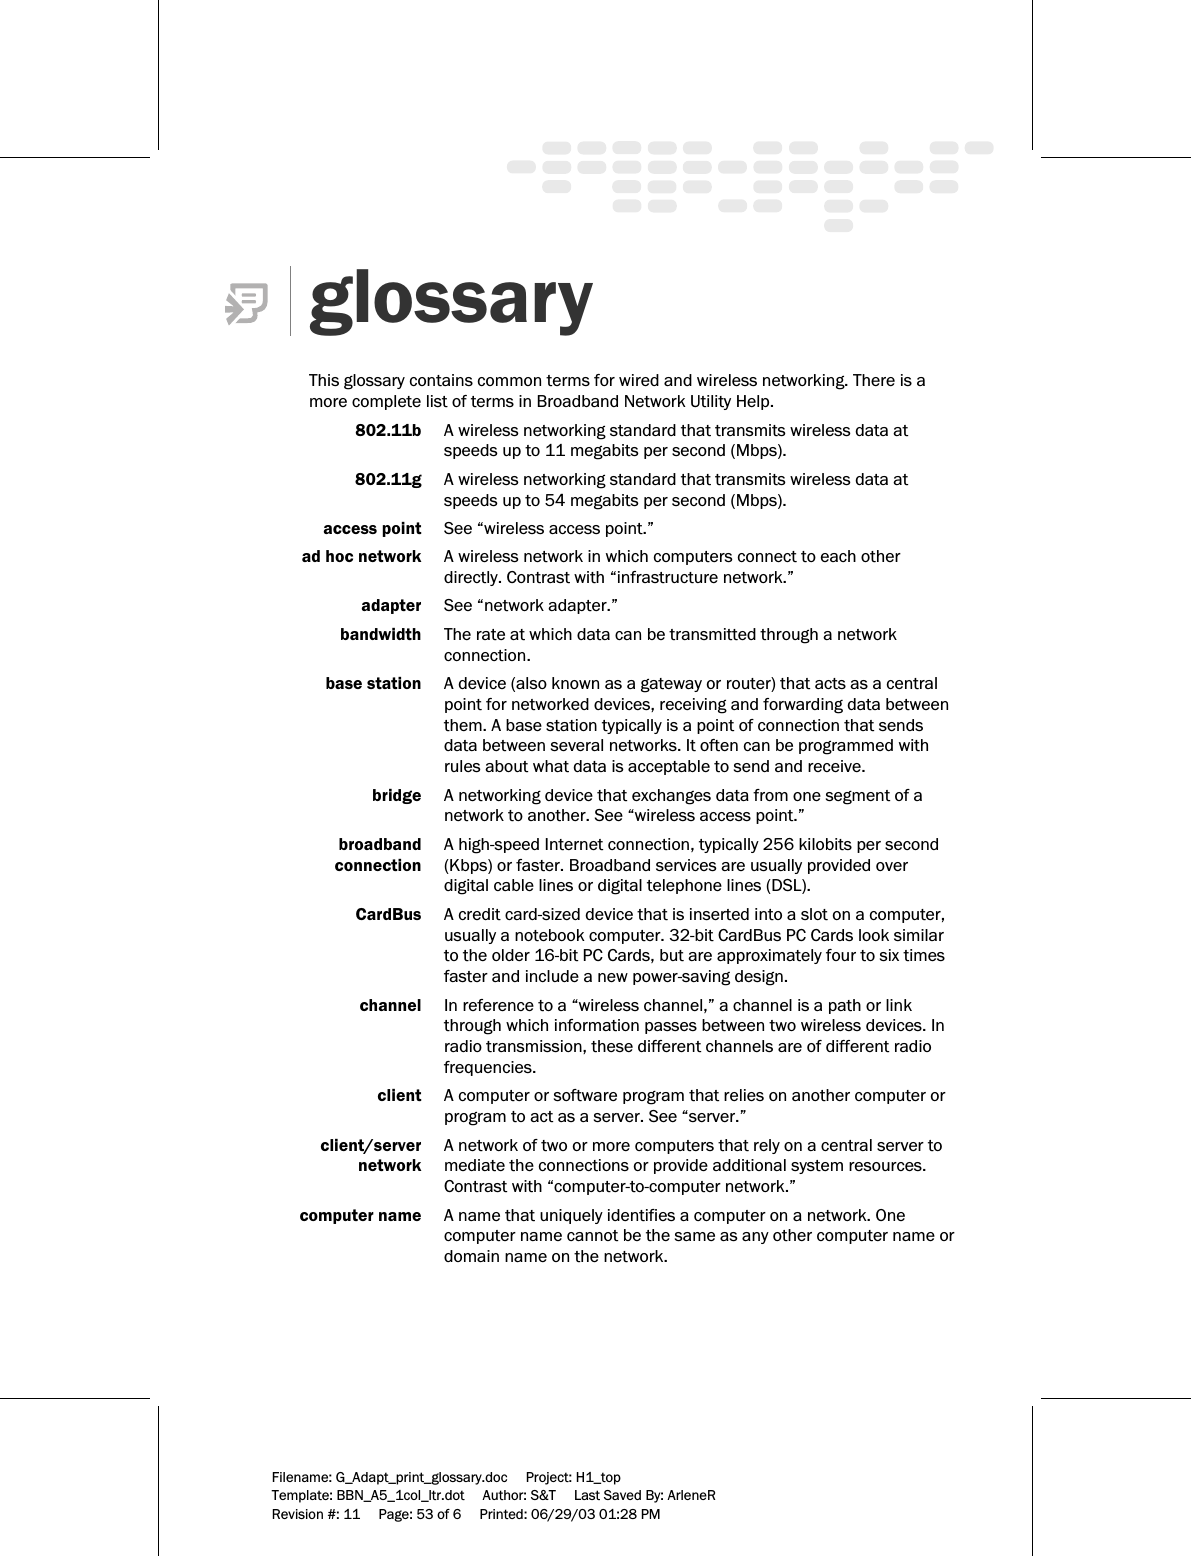     Filename: G_Adapt_print_glossary.doc     Project: H1_top    Template: BBN_A5_1col_ltr.dot     Author: S&amp;T     Last Saved By: ArleneR Revision #: 11     Page: 53 of 6     Printed: 06/29/03 01:28 PM   glossary  This glossary contains common terms for wired and wireless networking. There is a more complete list of terms in Broadband Network Utility Help.    802.11b  A wireless networking standard that transmits wireless data at speeds up to 11 megabits per second (Mbps).   802.11g  A wireless networking standard that transmits wireless data at speeds up to 54 megabits per second (Mbps).   access point  See “wireless access point.”   ad hoc network  A wireless network in which computers connect to each other directly. Contrast with “infrastructure network.”  adapter  See “network adapter.”     bandwidth  The rate at which data can be transmitted through a network connection.   base station  A device (also known as a gateway or router) that acts as a central point for networked devices, receiving and forwarding data between them. A base station typically is a point of connection that sends data between several networks. It often can be programmed with rules about what data is acceptable to send and receive.  bridge  A networking device that exchanges data from one segment of a network to another. See “wireless access point.”  broadband   A high-speed Internet connection, typically 256 kilobits per second   connection  (Kbps) or faster. Broadband services are usually provided over digital cable lines or digital telephone lines (DSL).   CardBus  A credit card-sized device that is inserted into a slot on a computer, usually a notebook computer. 32-bit CardBus PC Cards look similar to the older 16-bit PC Cards, but are approximately four to six times faster and include a new power-saving design.    channel  In reference to a “wireless channel,” a channel is a path or link through which information passes between two wireless devices. In radio transmission, these different channels are of different radio frequencies.   client  A computer or software program that relies on another computer or program to act as a server. See “server.”  client/server   A network of two or more computers that rely on a central server to   network  mediate the connections or provide additional system resources. Contrast with “computer-to-computer network.”  computer name  A name that uniquely identifies a computer on a network. One computer name cannot be the same as any other computer name or domain name on the network.  